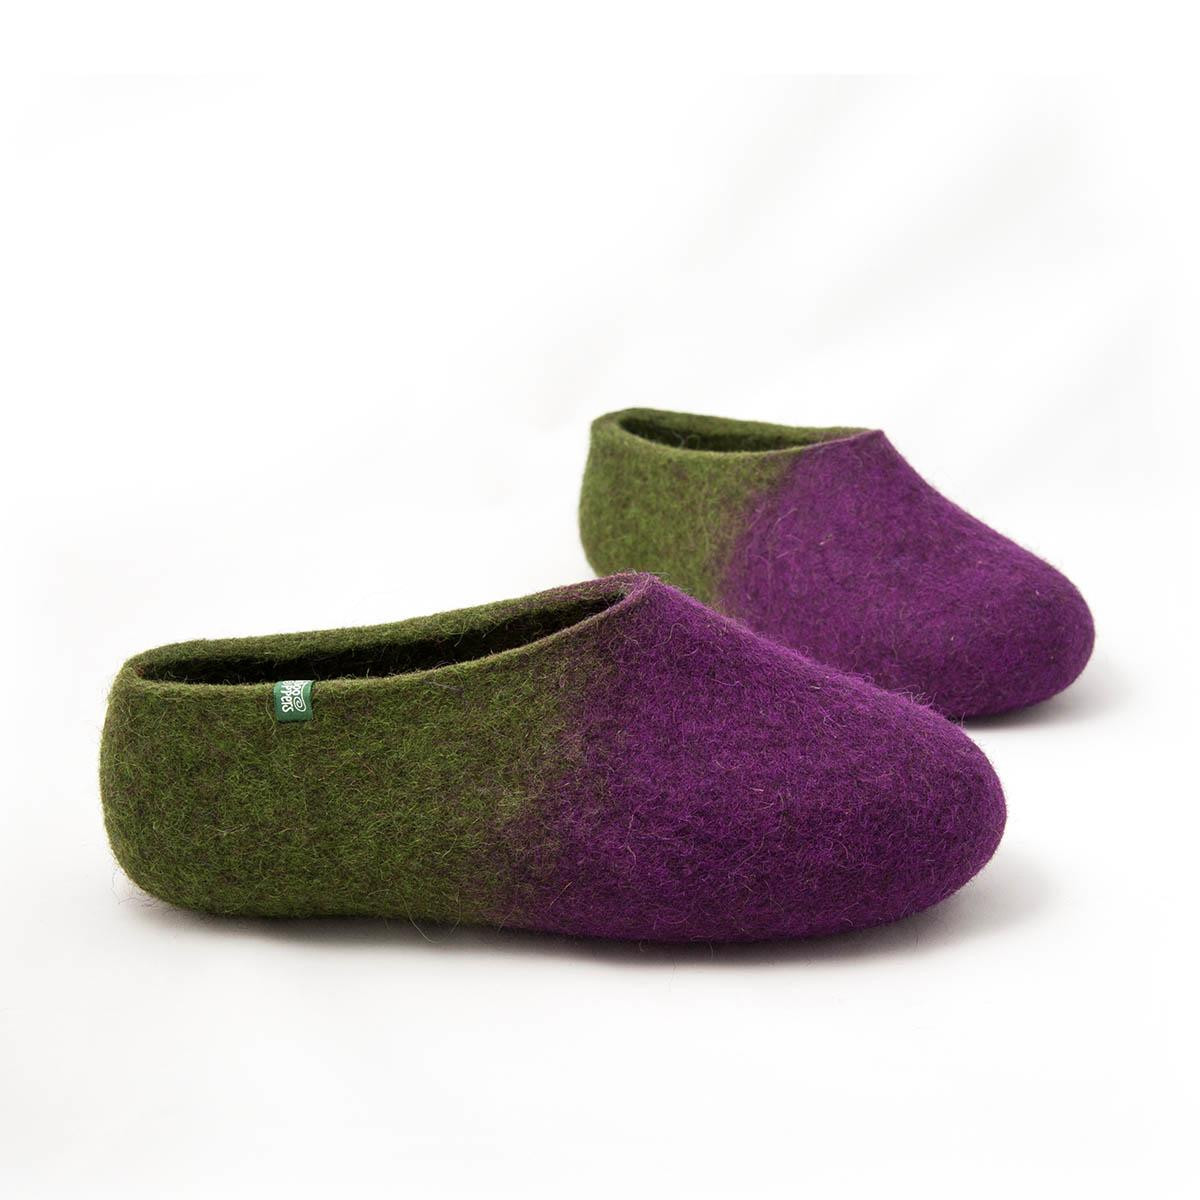 Bedroom Slippers Womens
 Womens bedroom slippers by Wooppers JAZZ purple and green